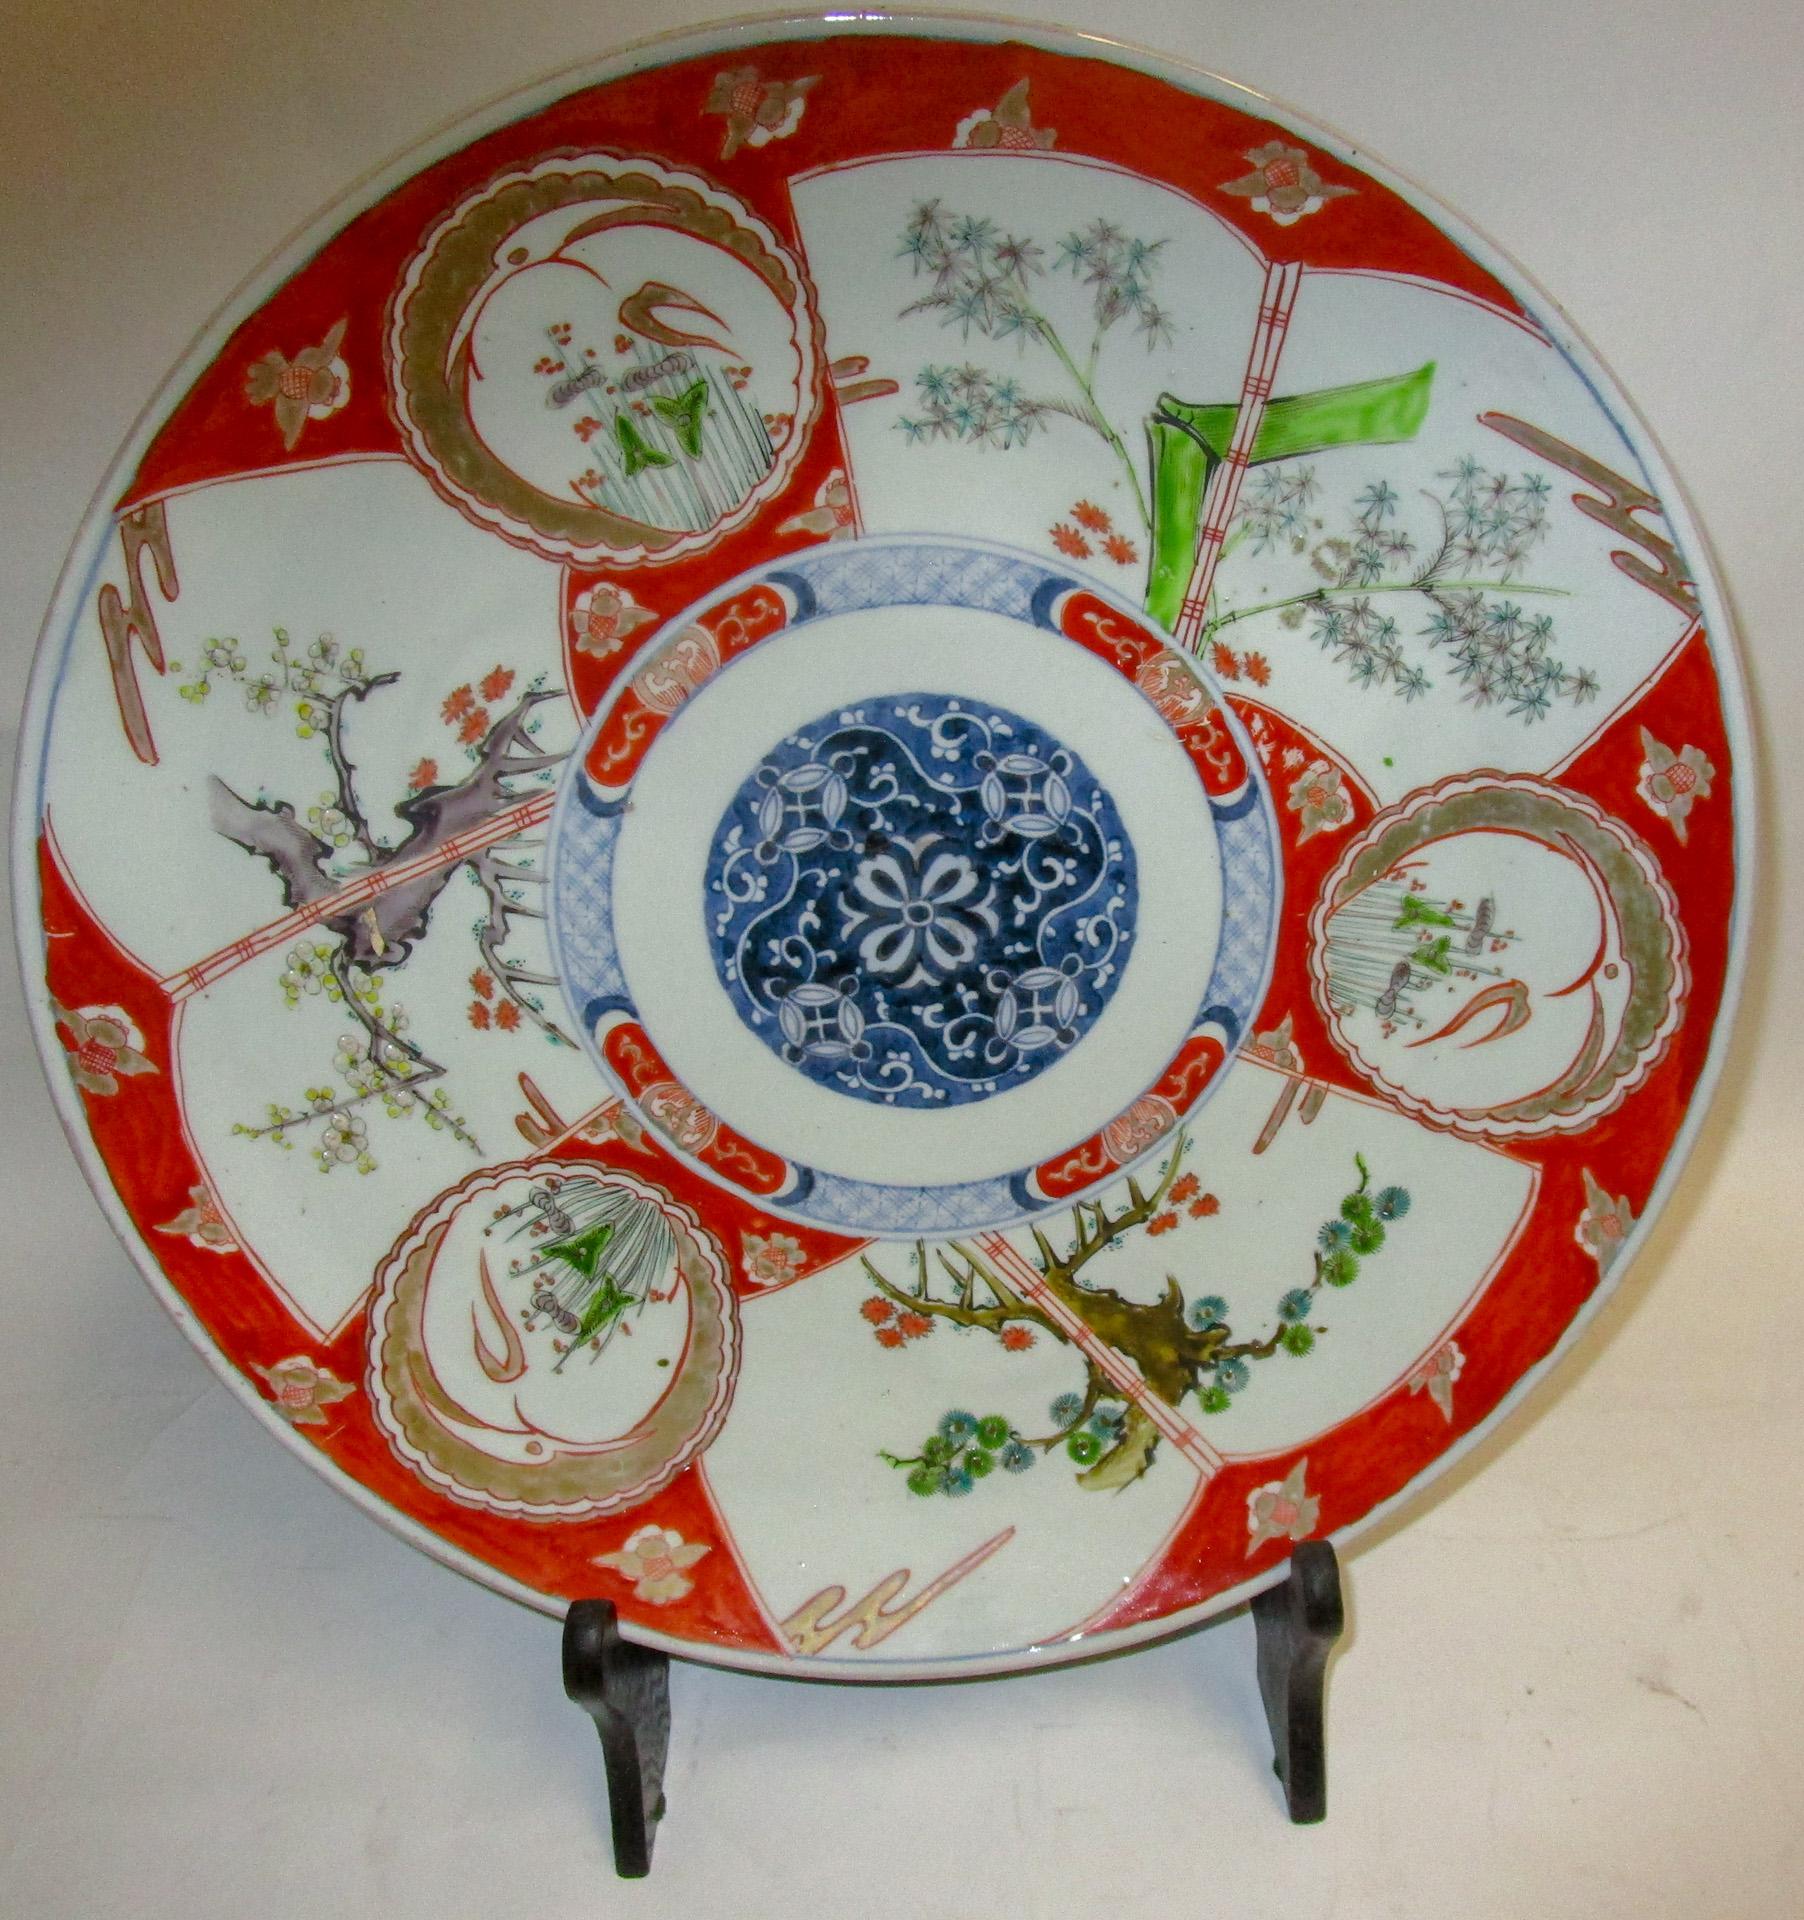 This handsome Japanese Porcelain charger dating from the Meiji era (1868-1912) is boldly hand painted with deep rich blue and cinnabar enamel with unusual green accents. The platter features a blue center medallion, various other designs and